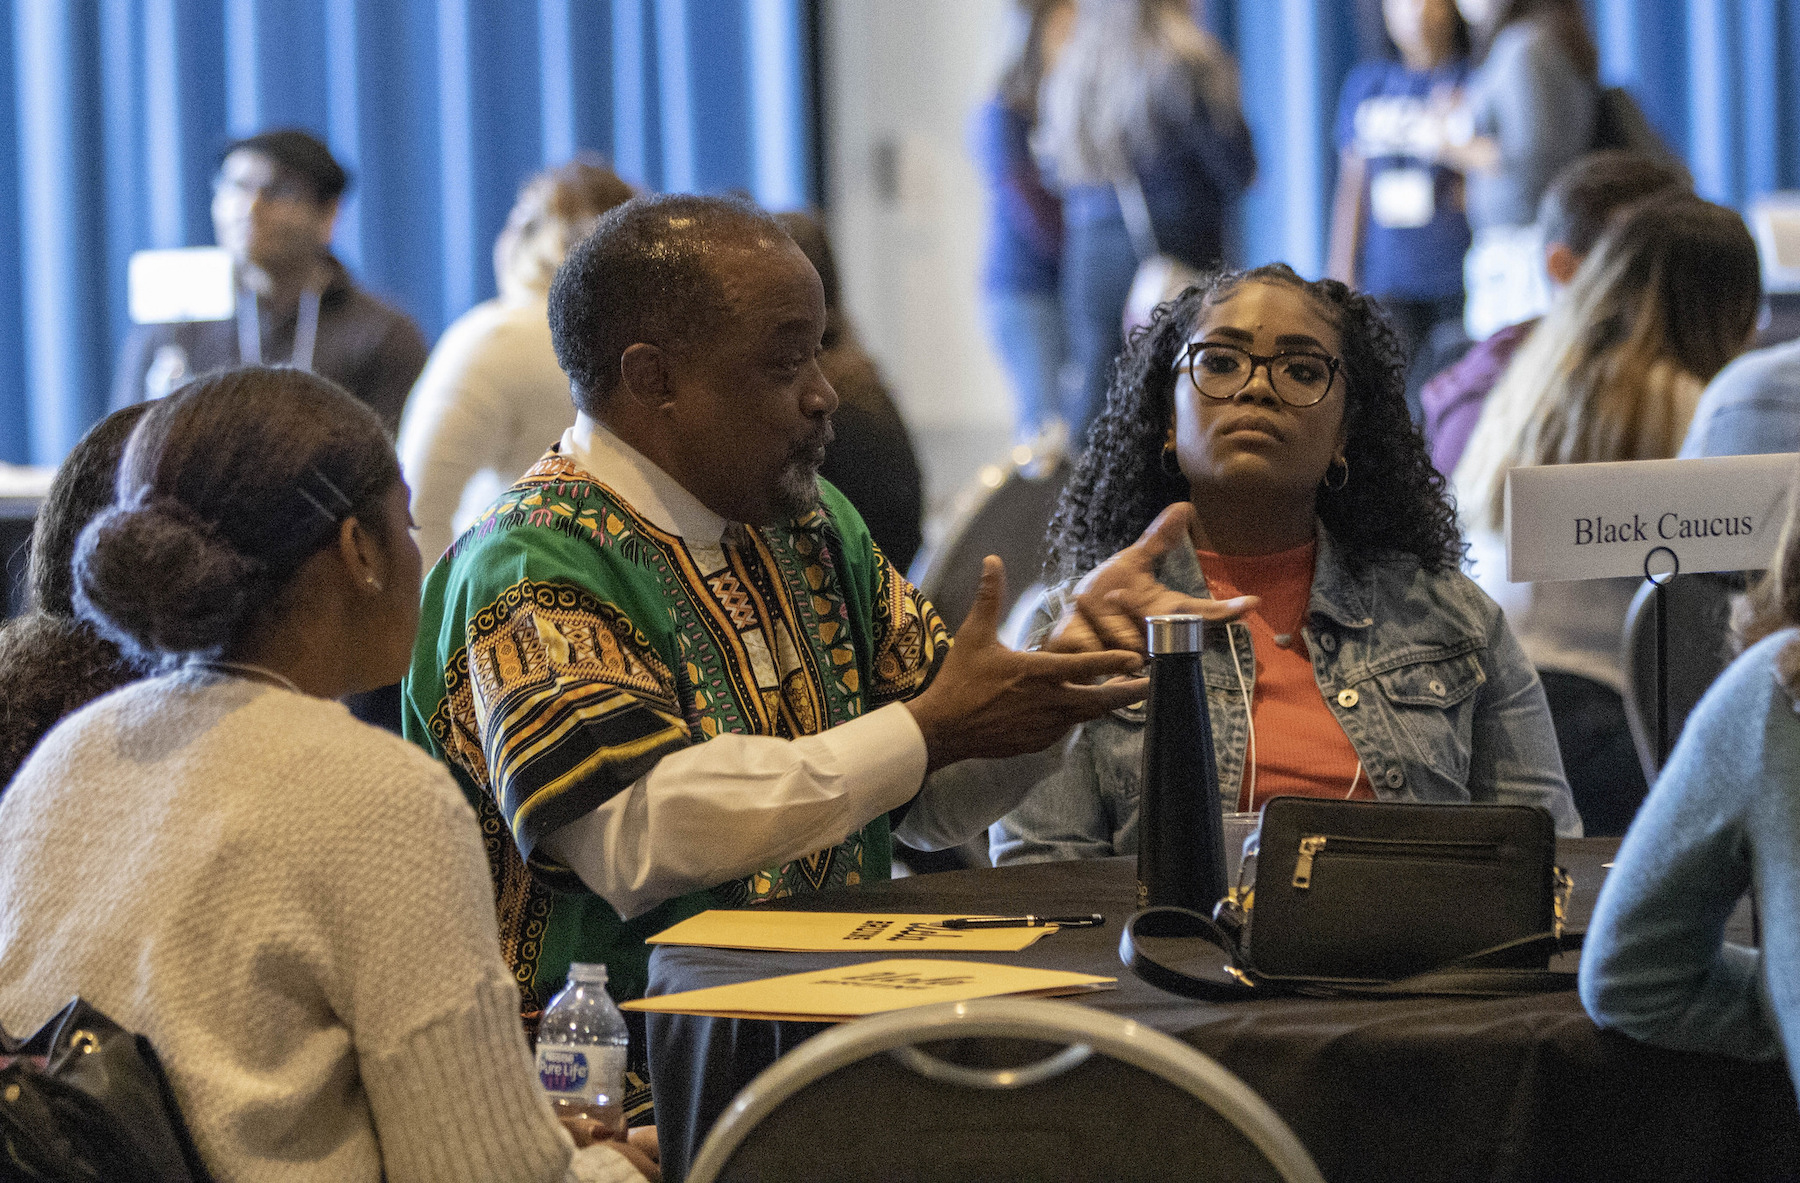 UCLA Luskin's numerous student support groups came together to share information at the 2018 Diversity Fair. Photo by Mary Braswell